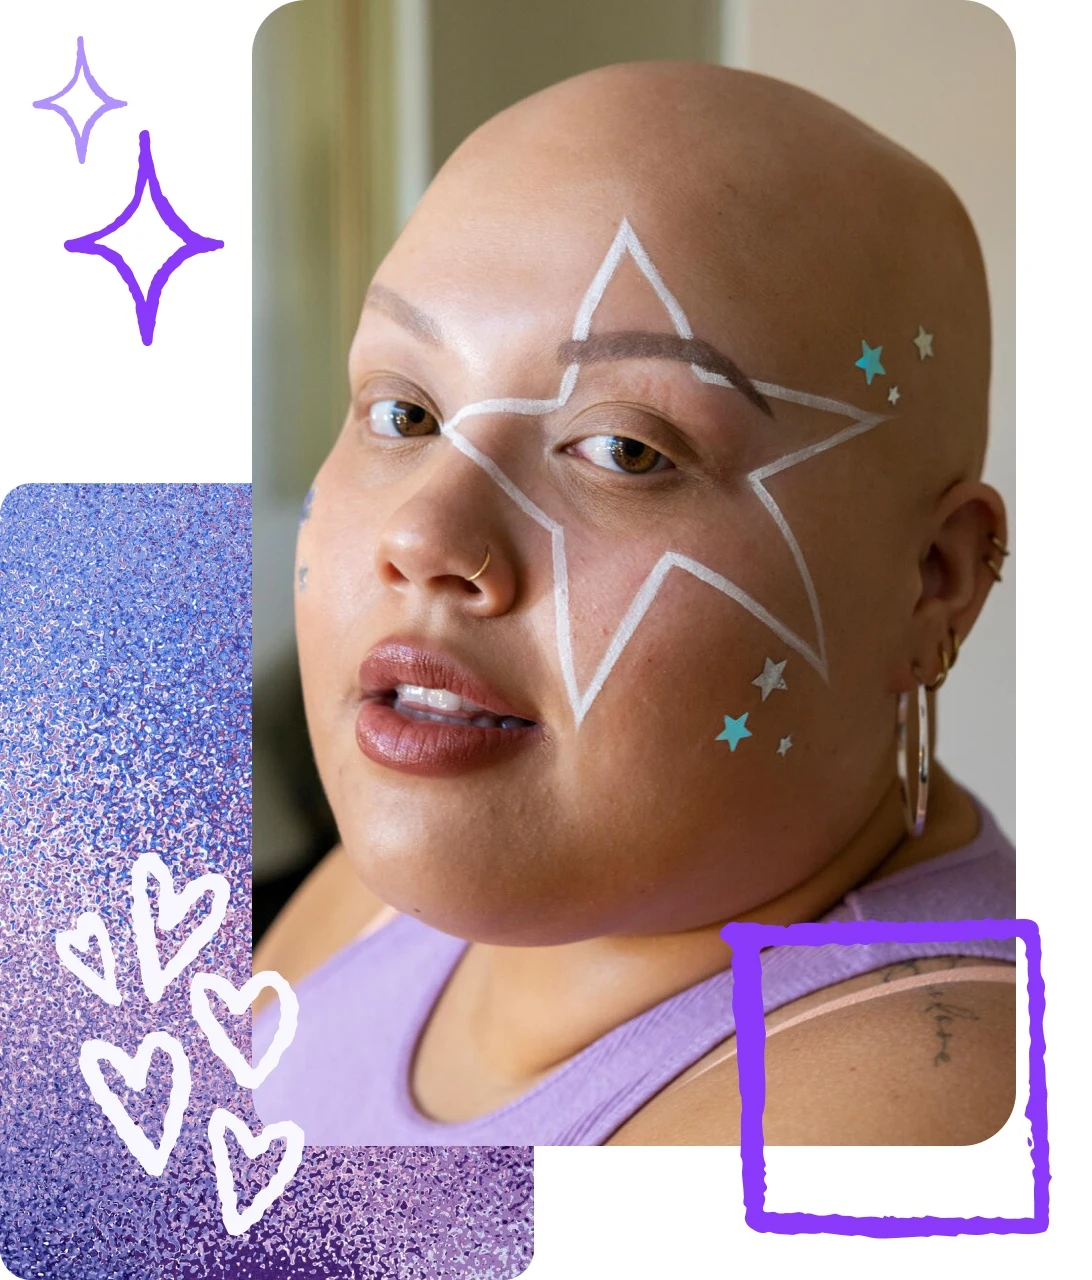 Pin collage of woman with bald head wearing star makeup with purple accents